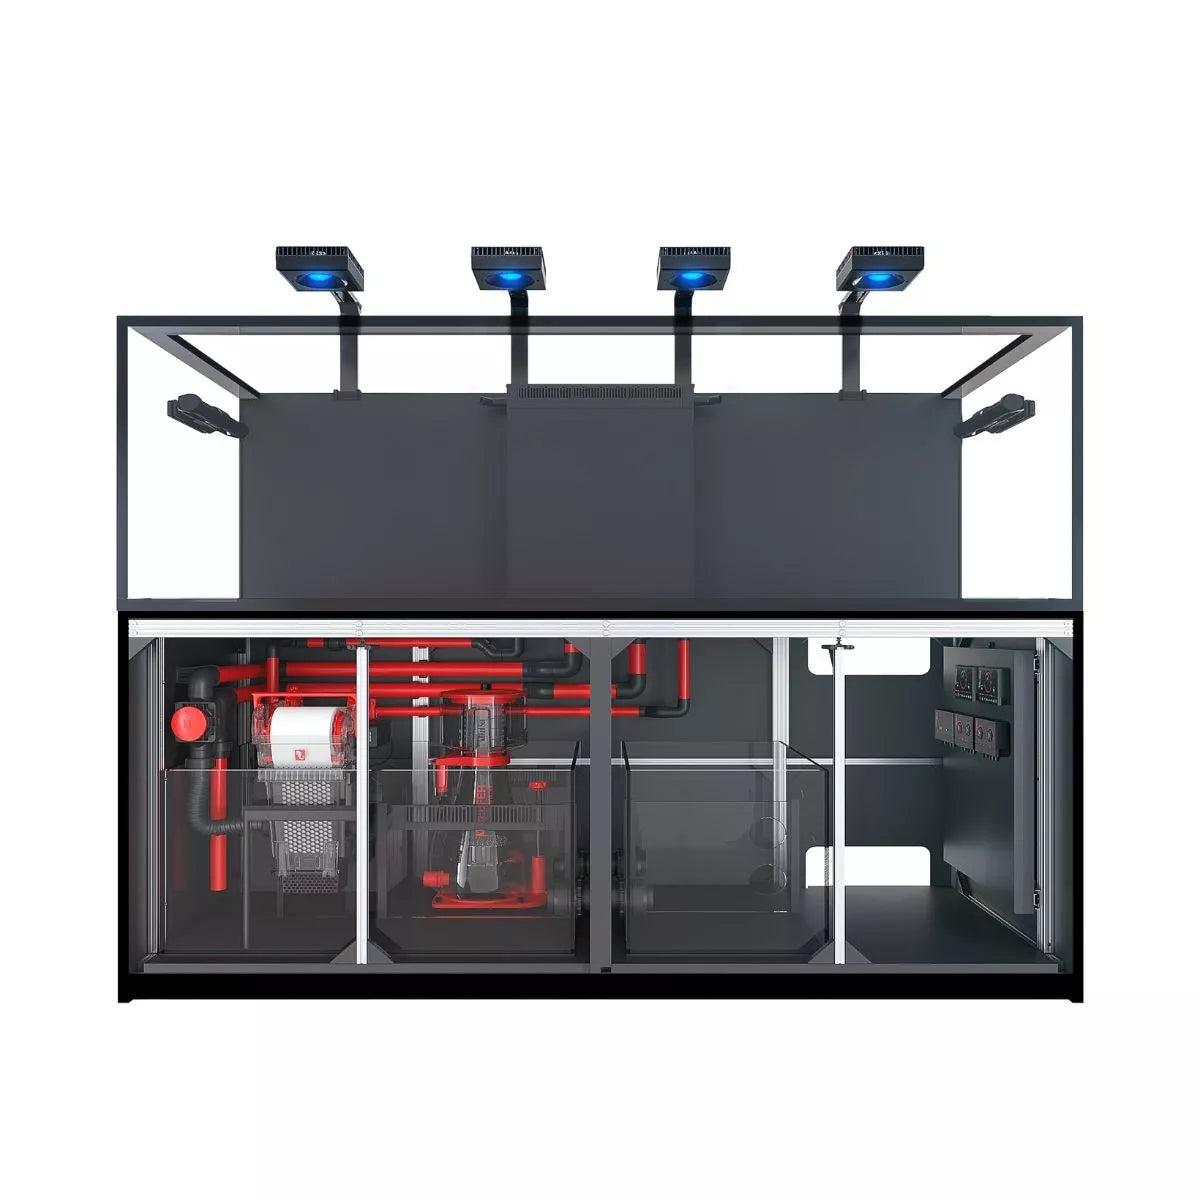 Reefer MAX S-1000 G2+ System (210 Gal) - Red Sea